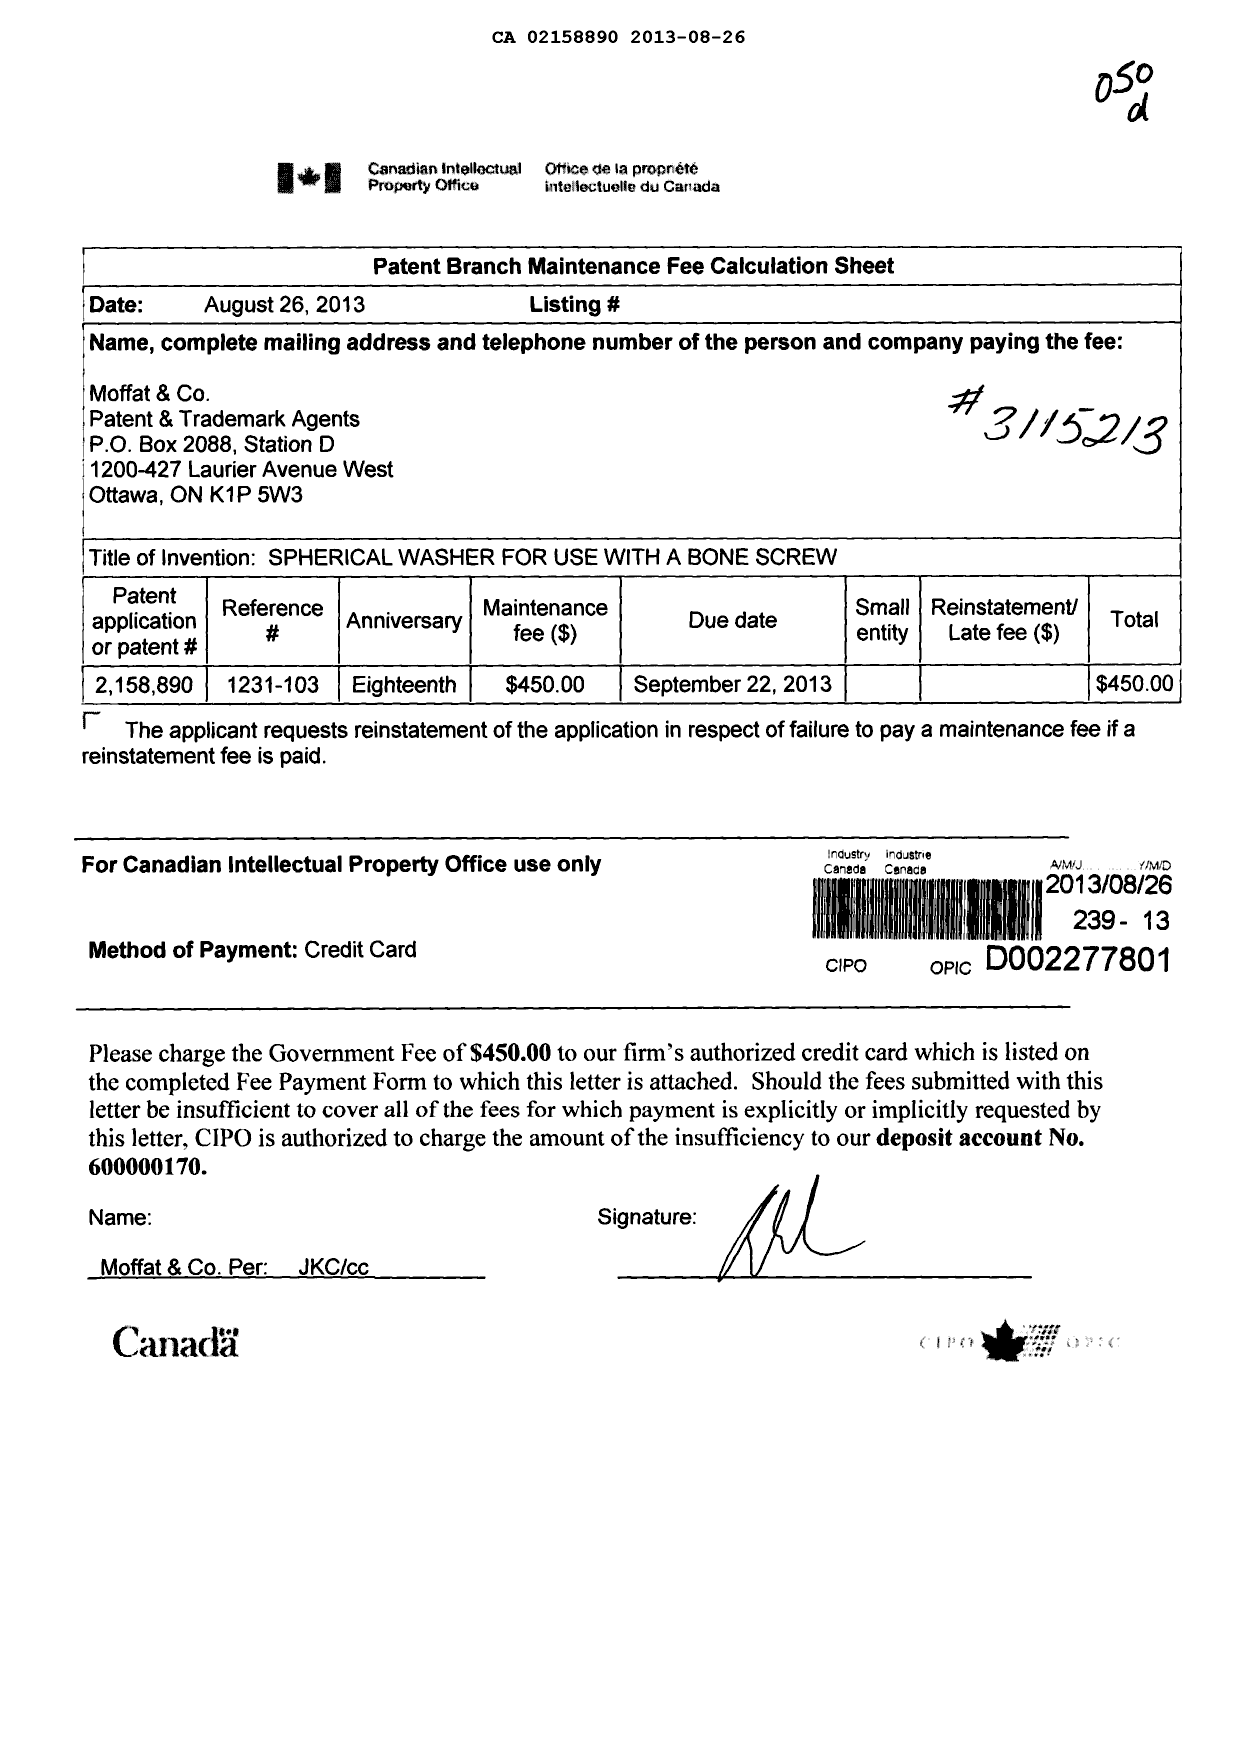 Canadian Patent Document 2158890. Fees 20130826. Image 1 of 1